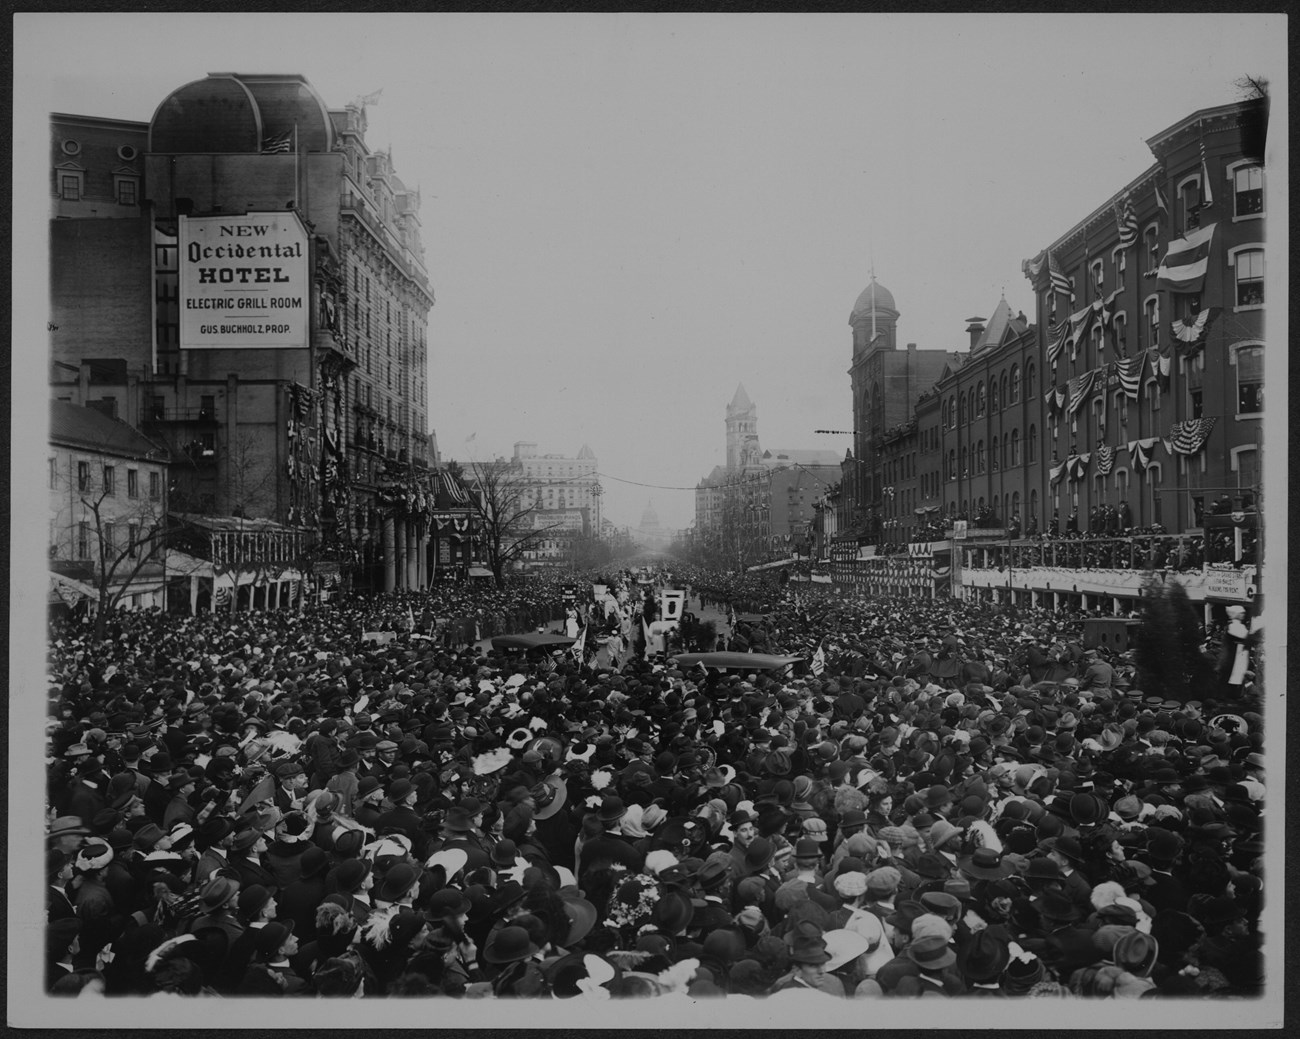 Photograph of suffrage procession surrounded by huge crowds in the street.